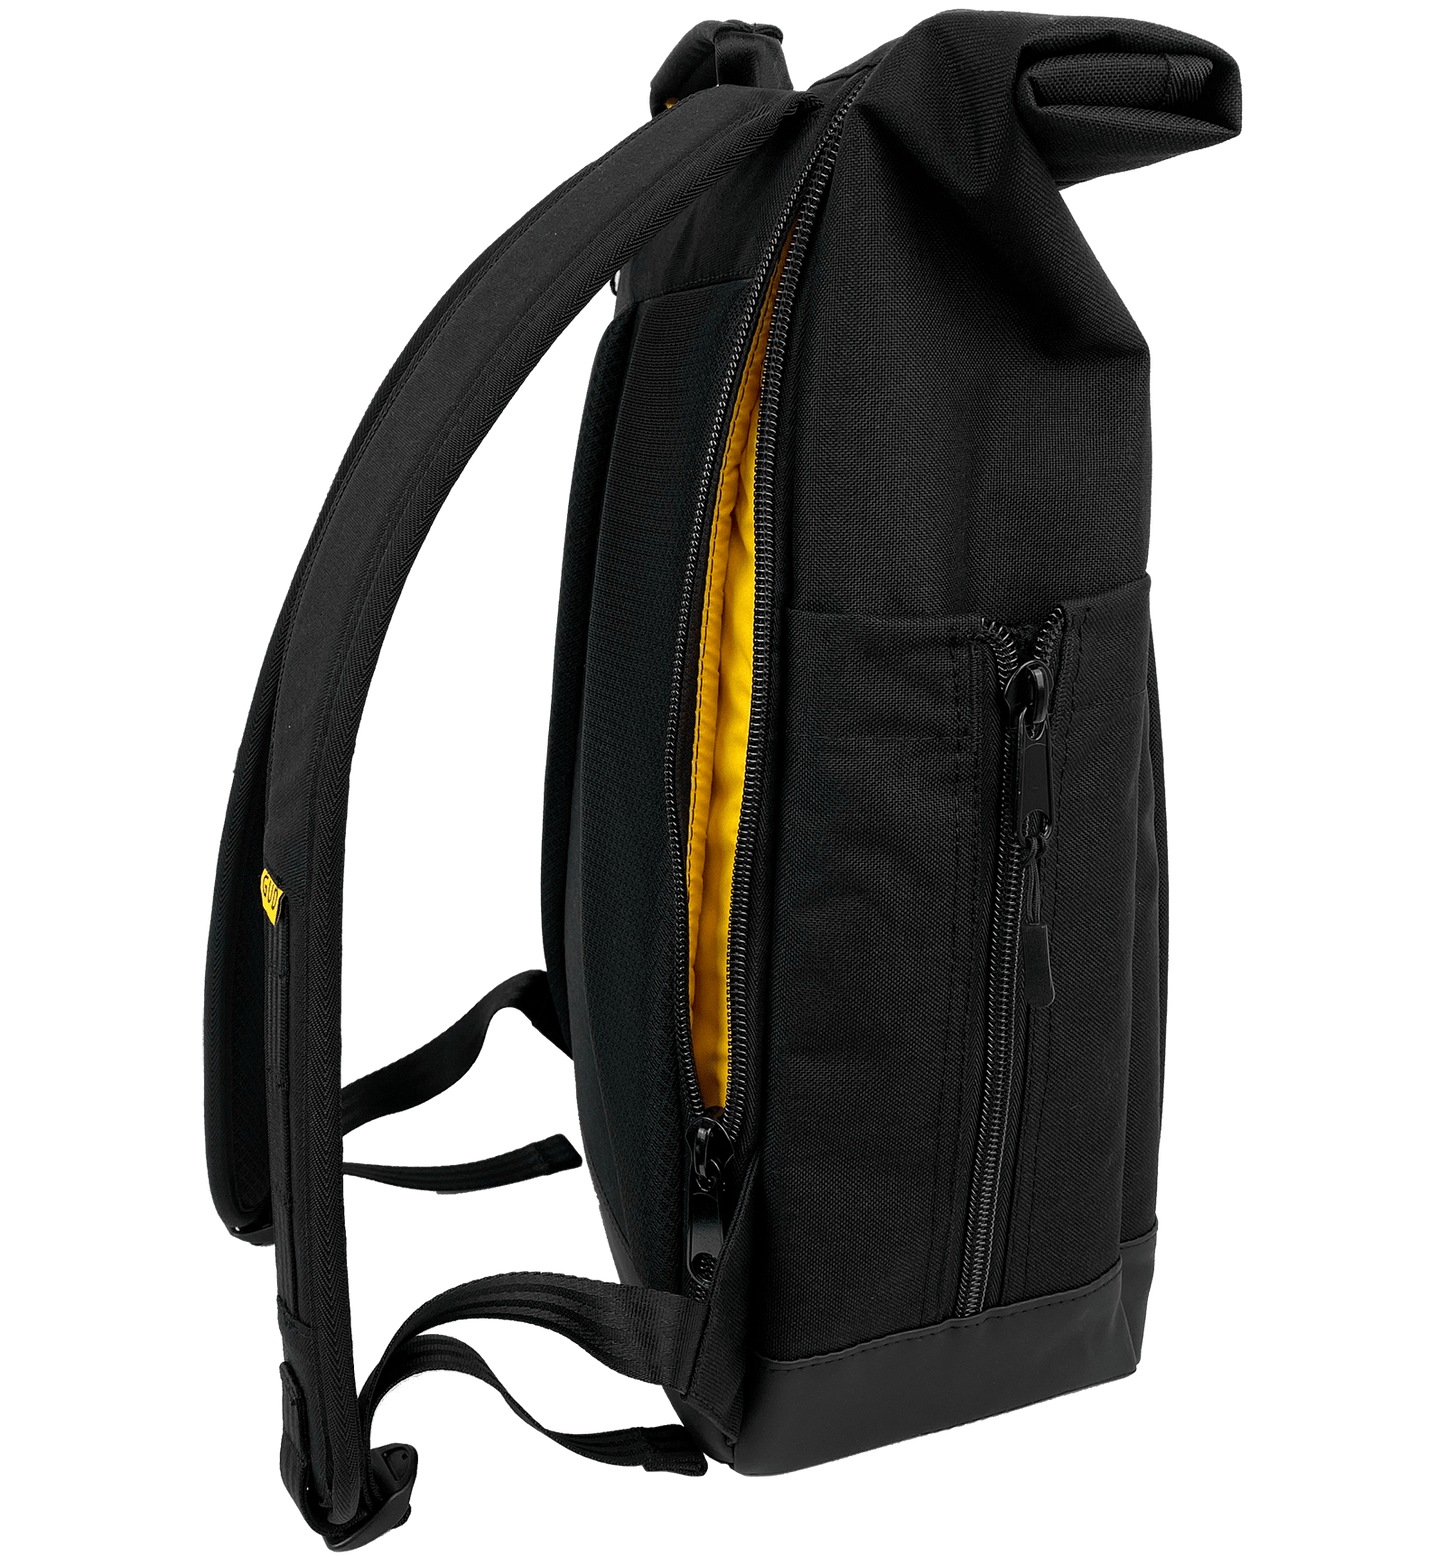 Rolltop 2.0 Backpack by GUD